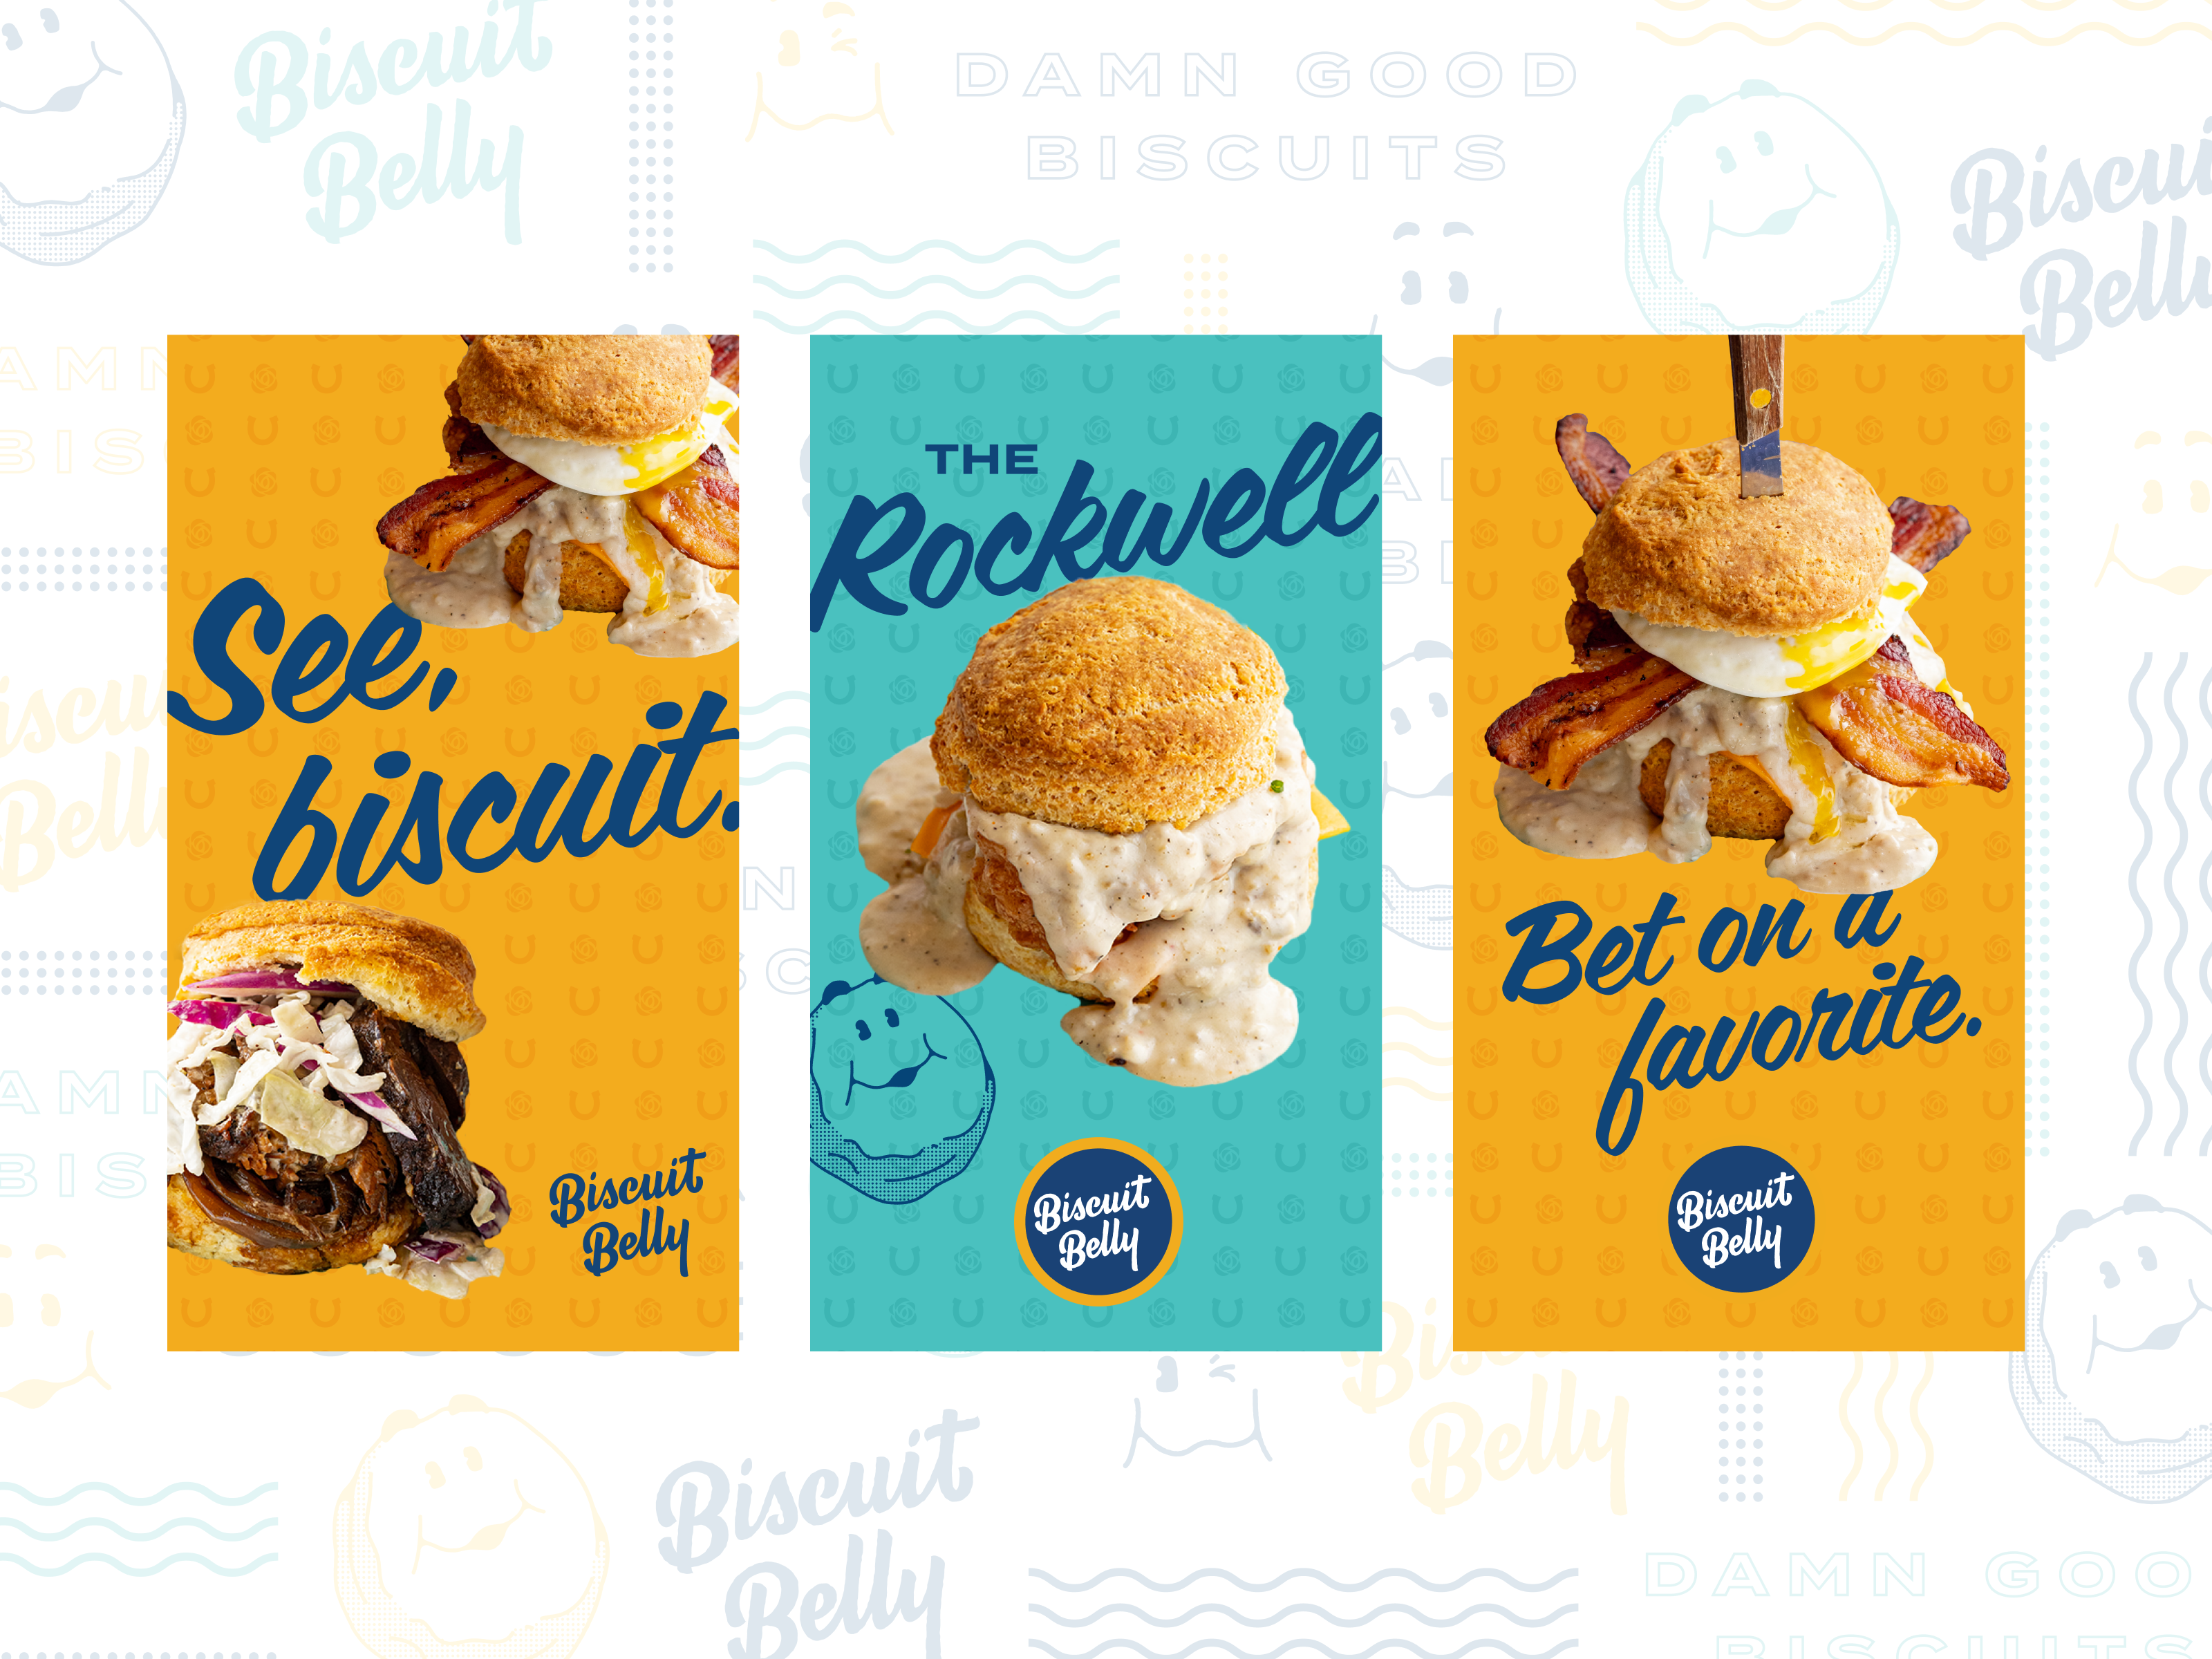 Showing a series of Biscuit Belly ads.